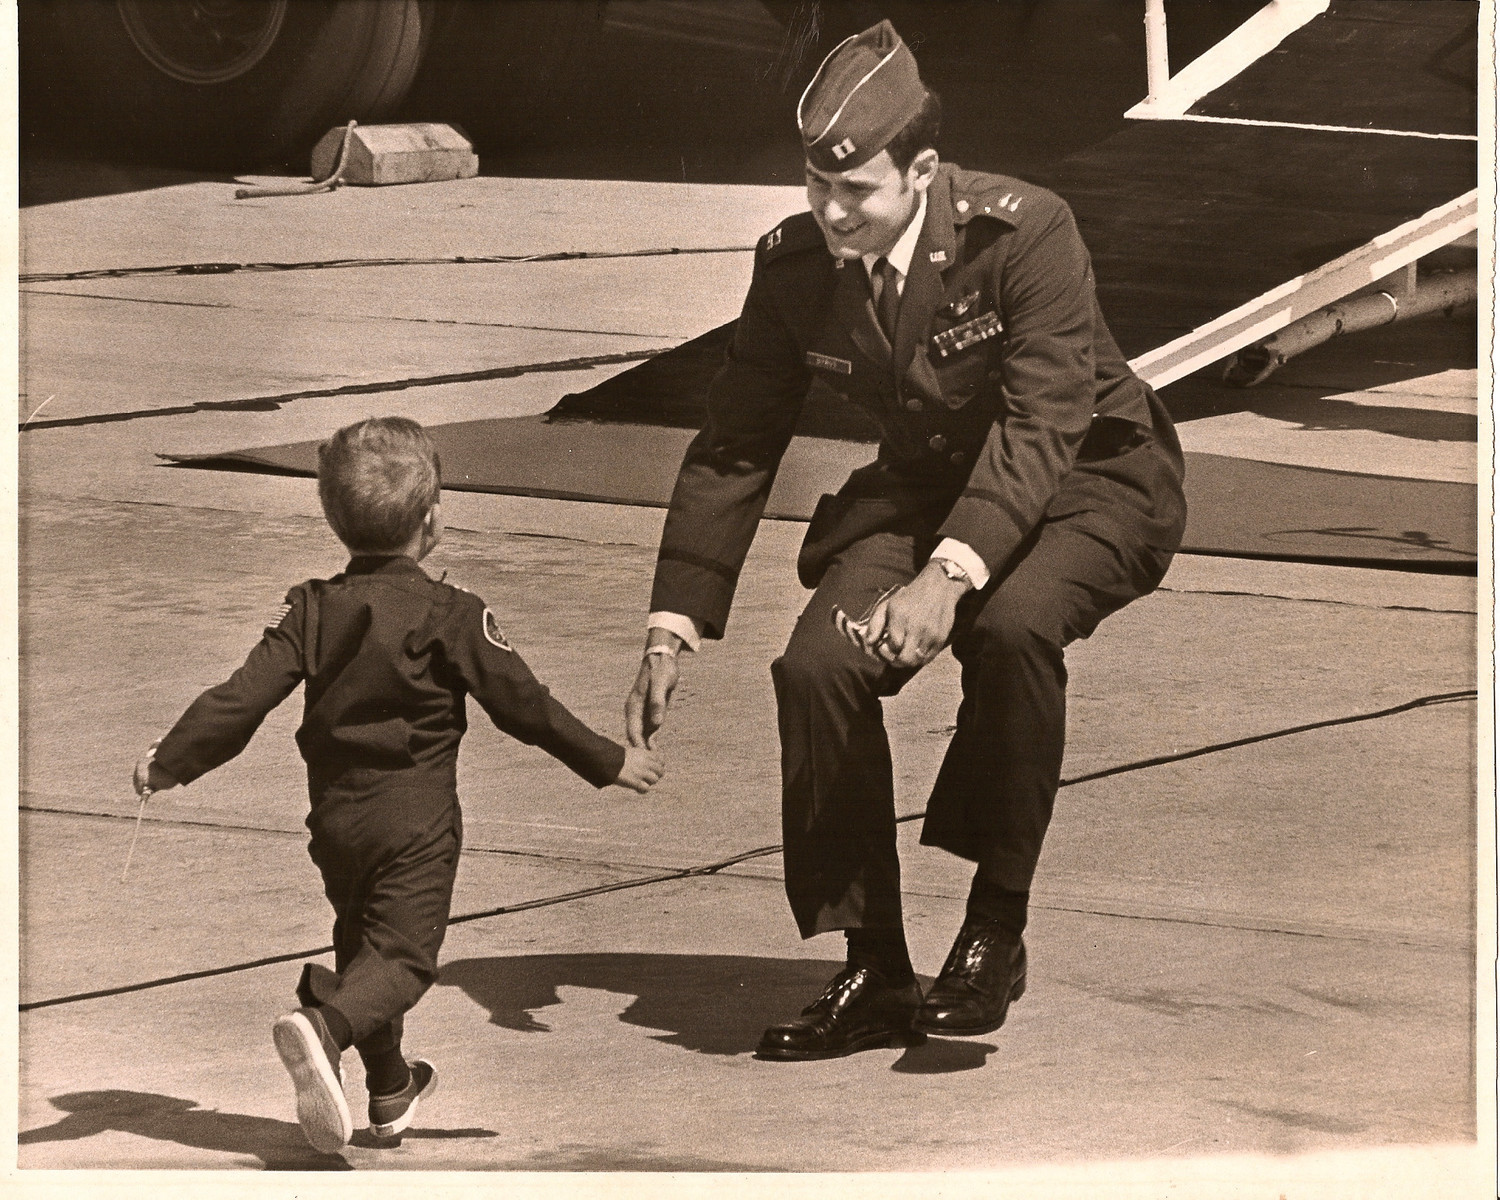 Submitted photo
William Byrns is seen being greeted by his son Scott in 1973 upon Byrns' return to his family after being held prisoner for about a year by the North Vietnamese Army.